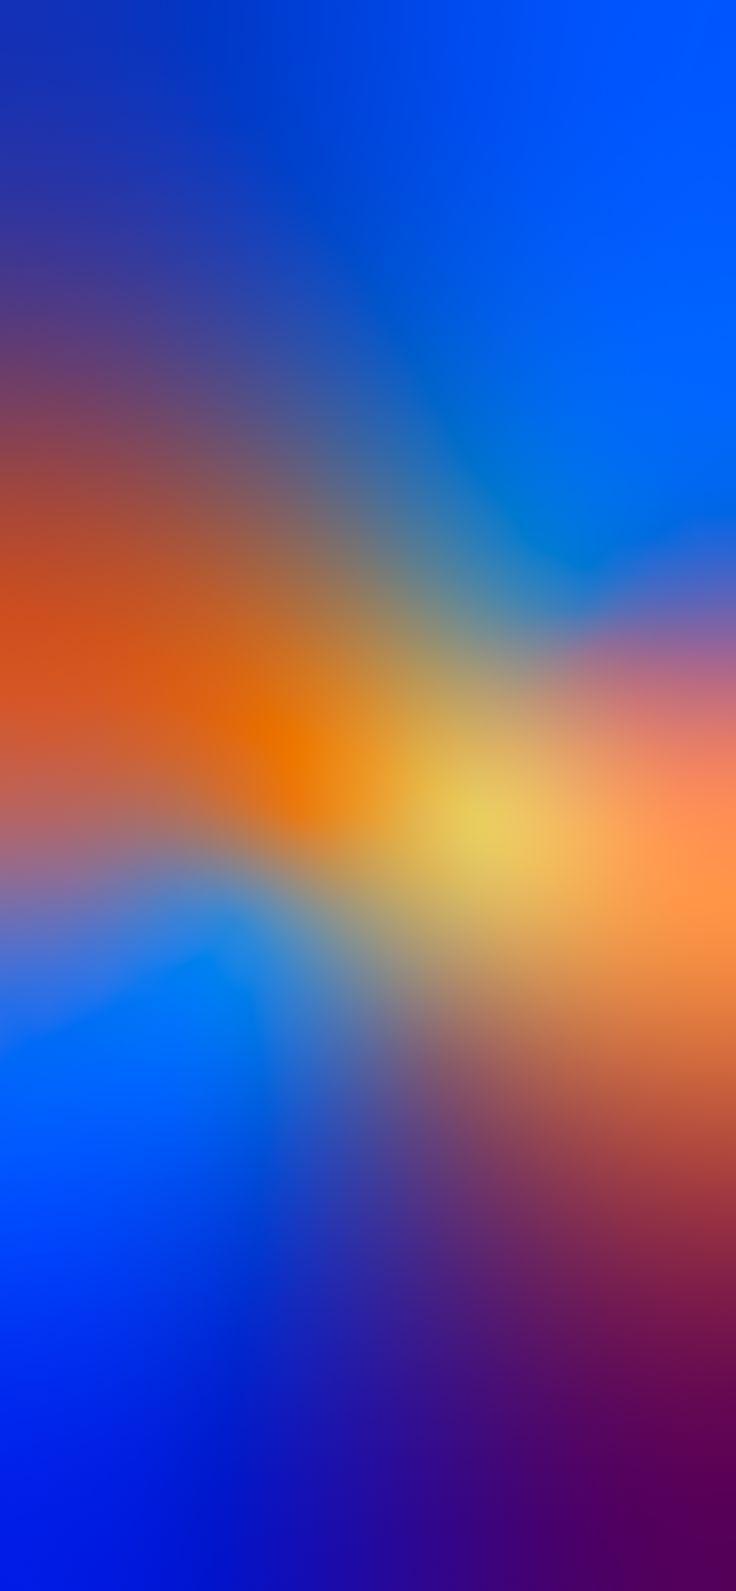 Blue To Orange Gradient For iPhone By Hk3ton On Black